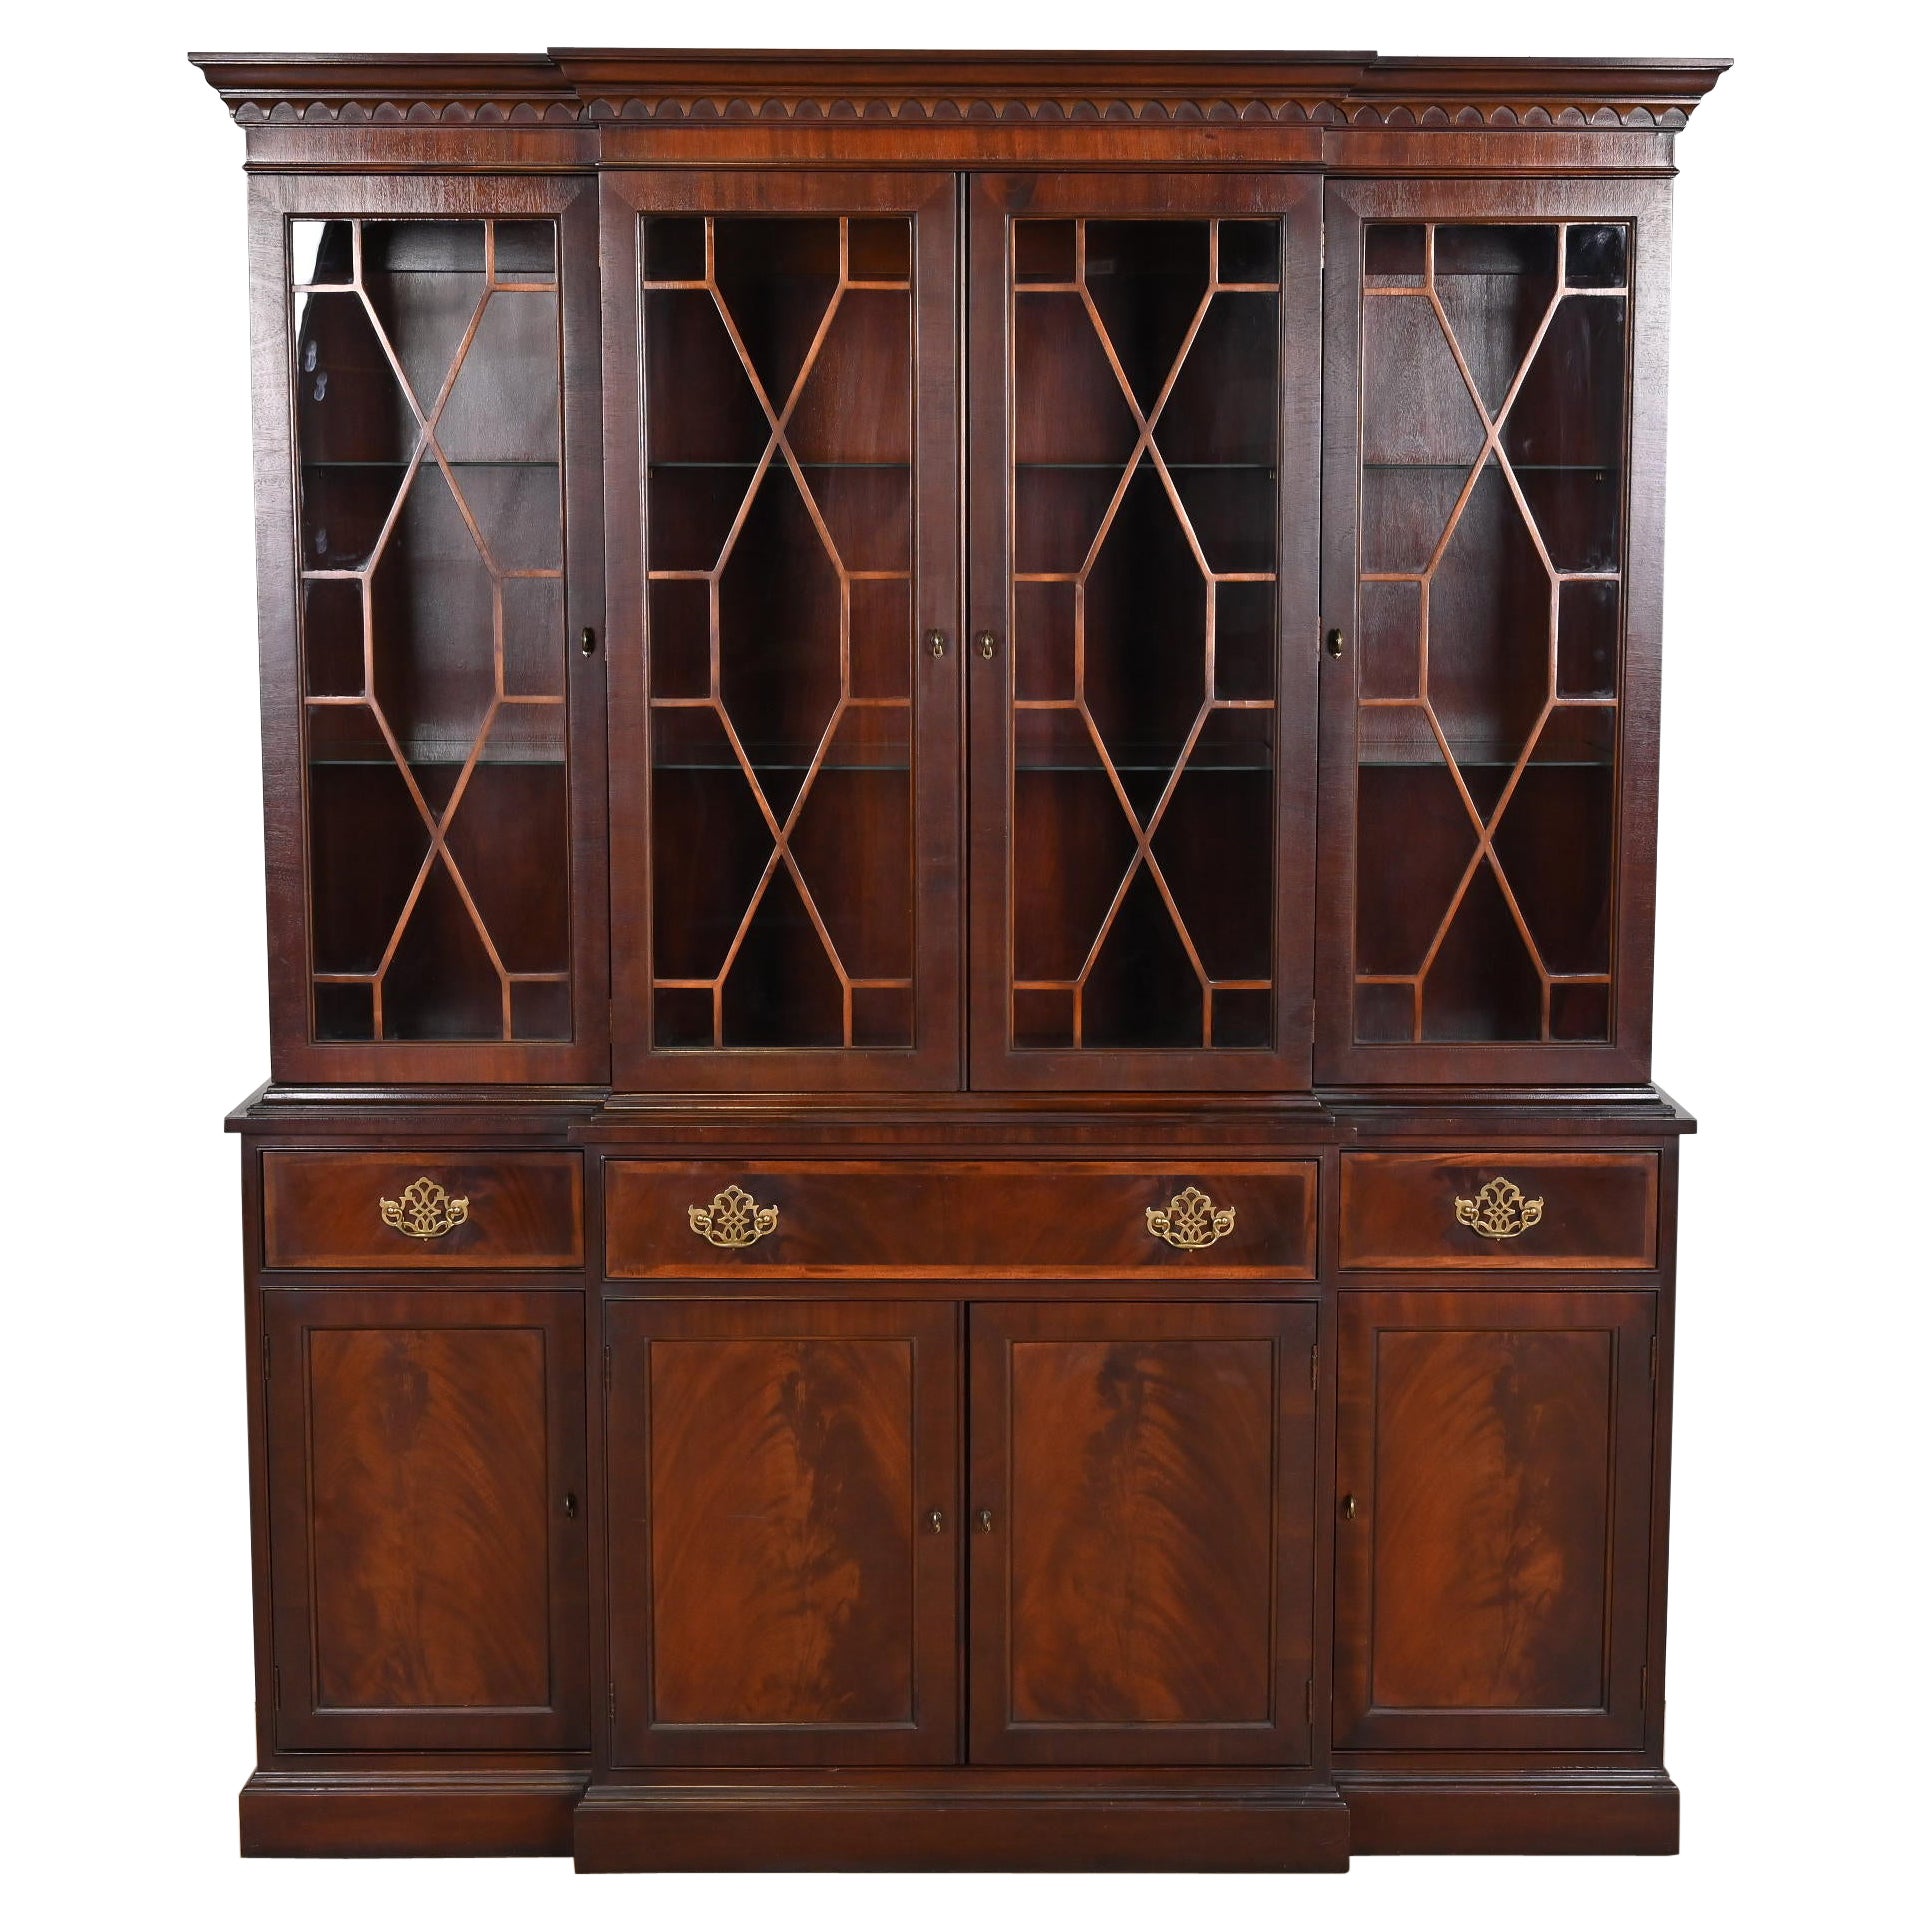 Georgian Carved Mahogany Lighted Breakfront Bookcase Cabinet by Hickory For Sale